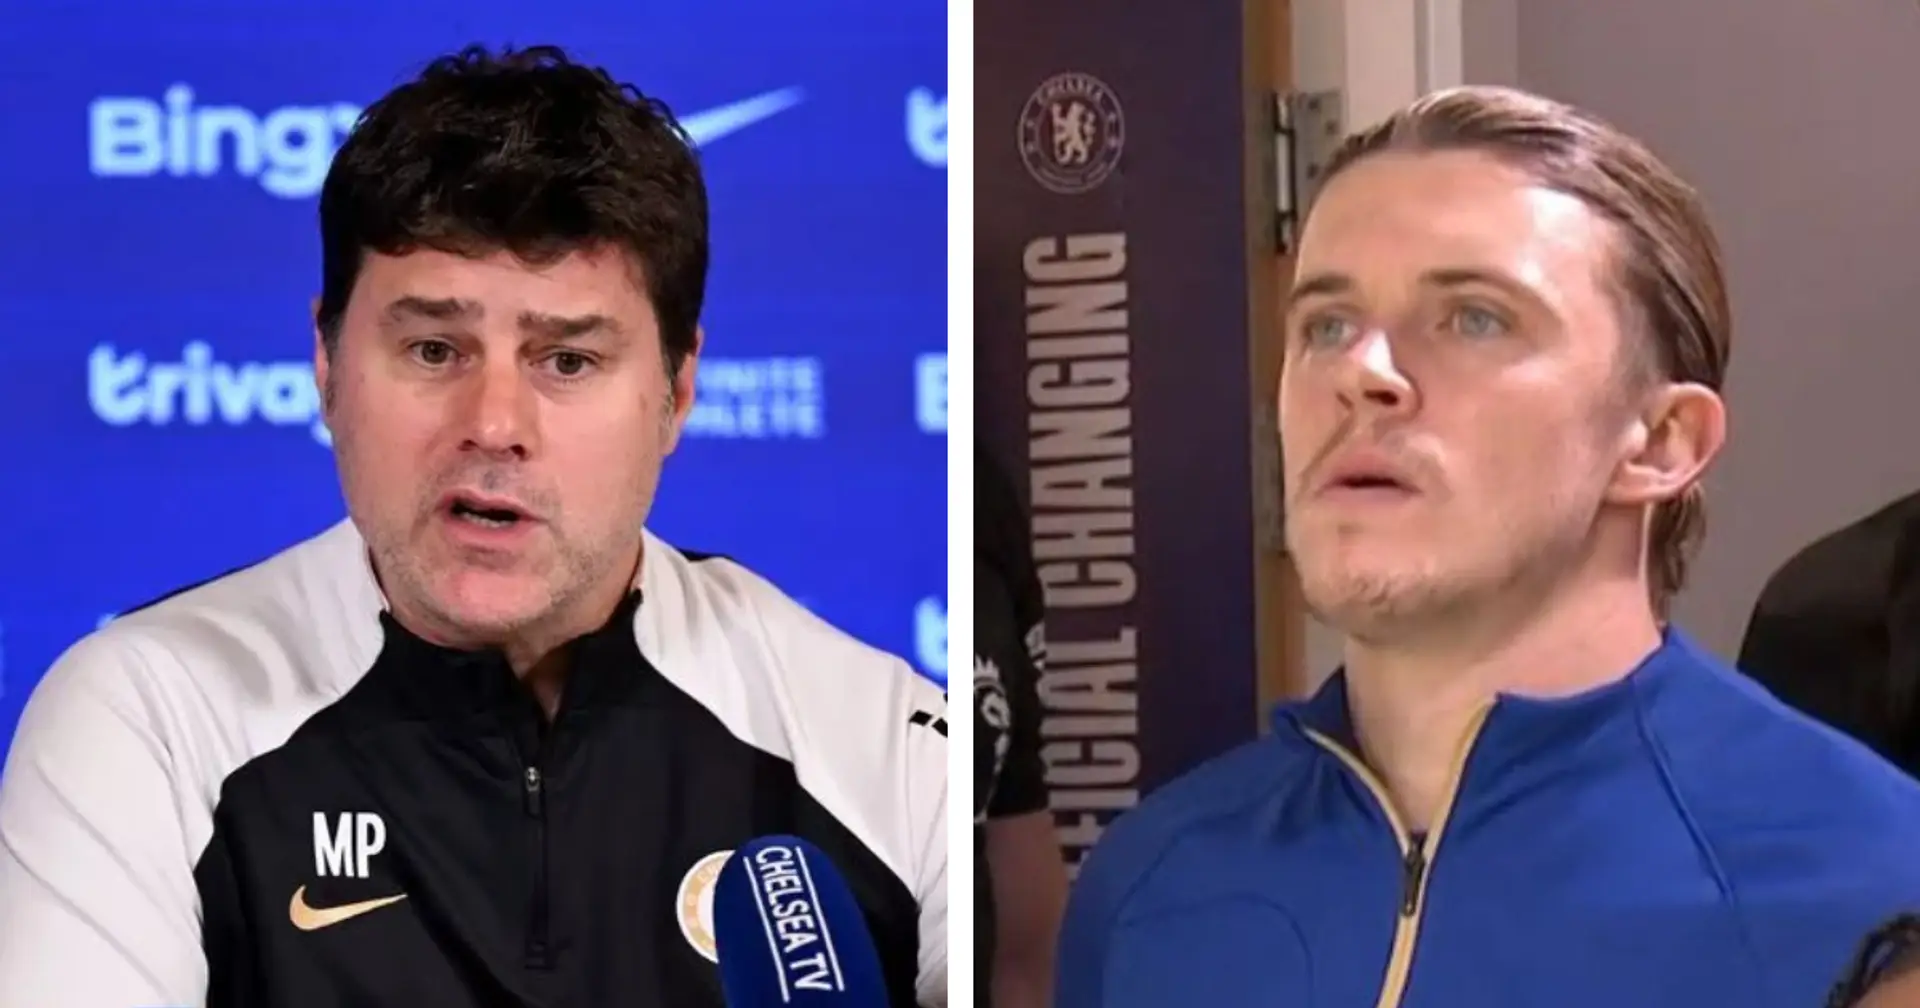 Pochettino stands by Gallagher amid racism accusations: 'People try to find things like this to create a mess'